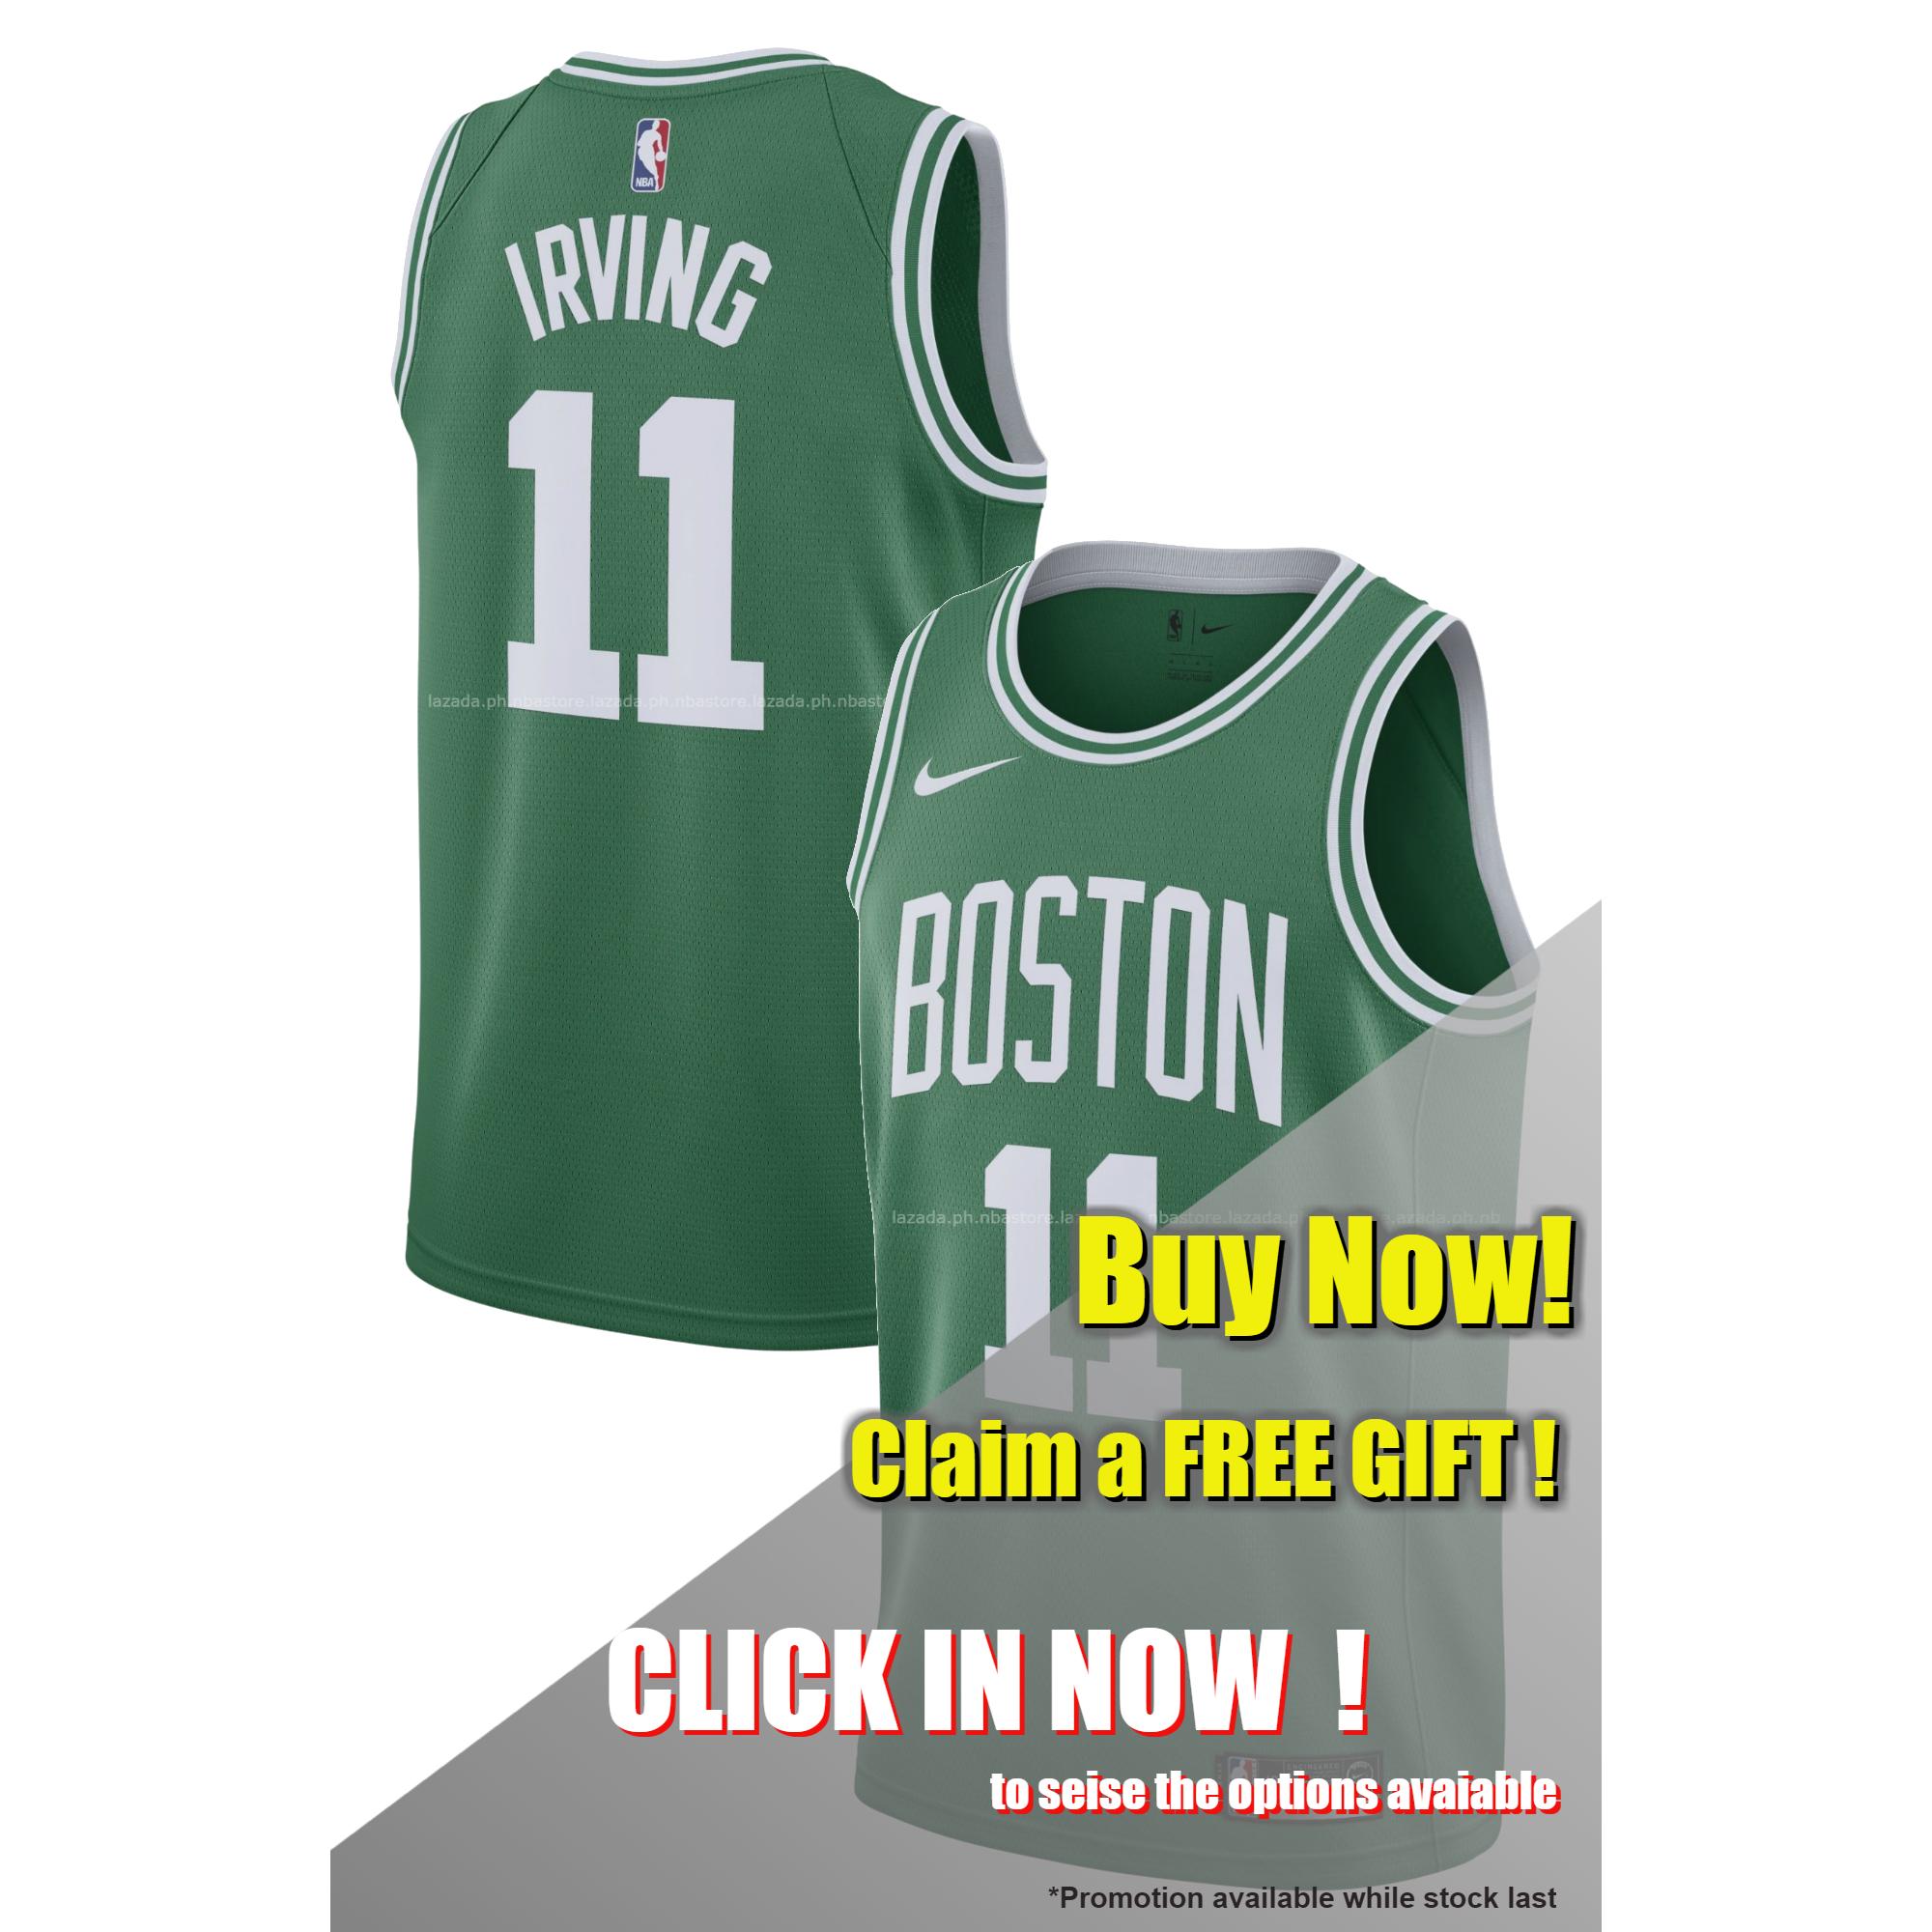 kyrie irving jersey philippines